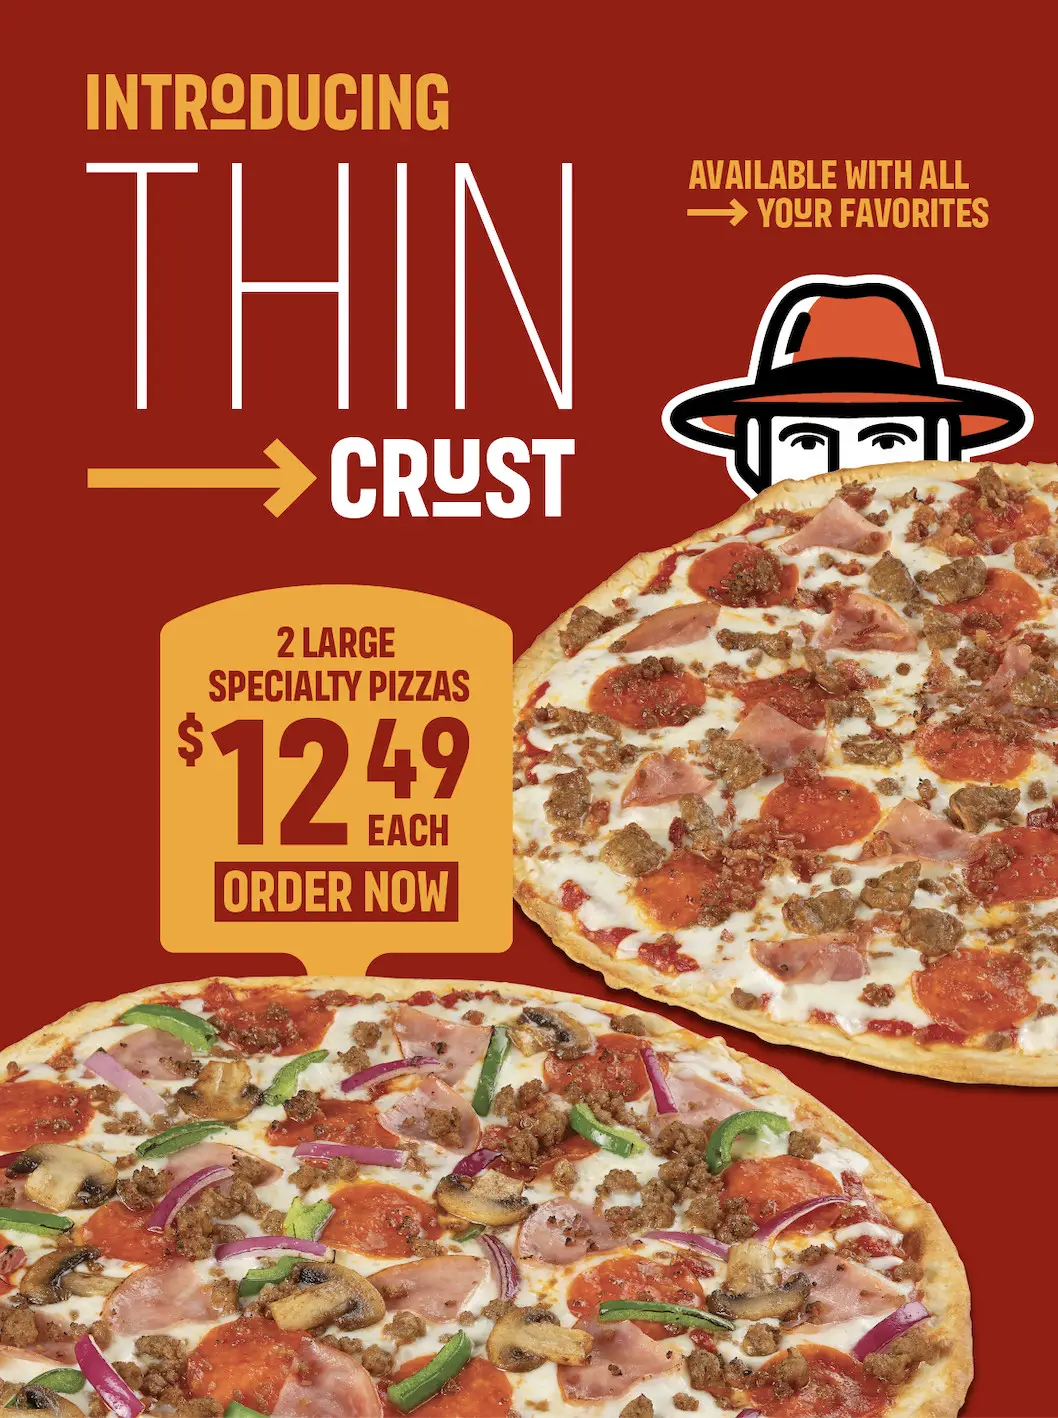 Pizza Patron Presidents Day Get 2 Large Specialty Pizzas for $12.49 Each